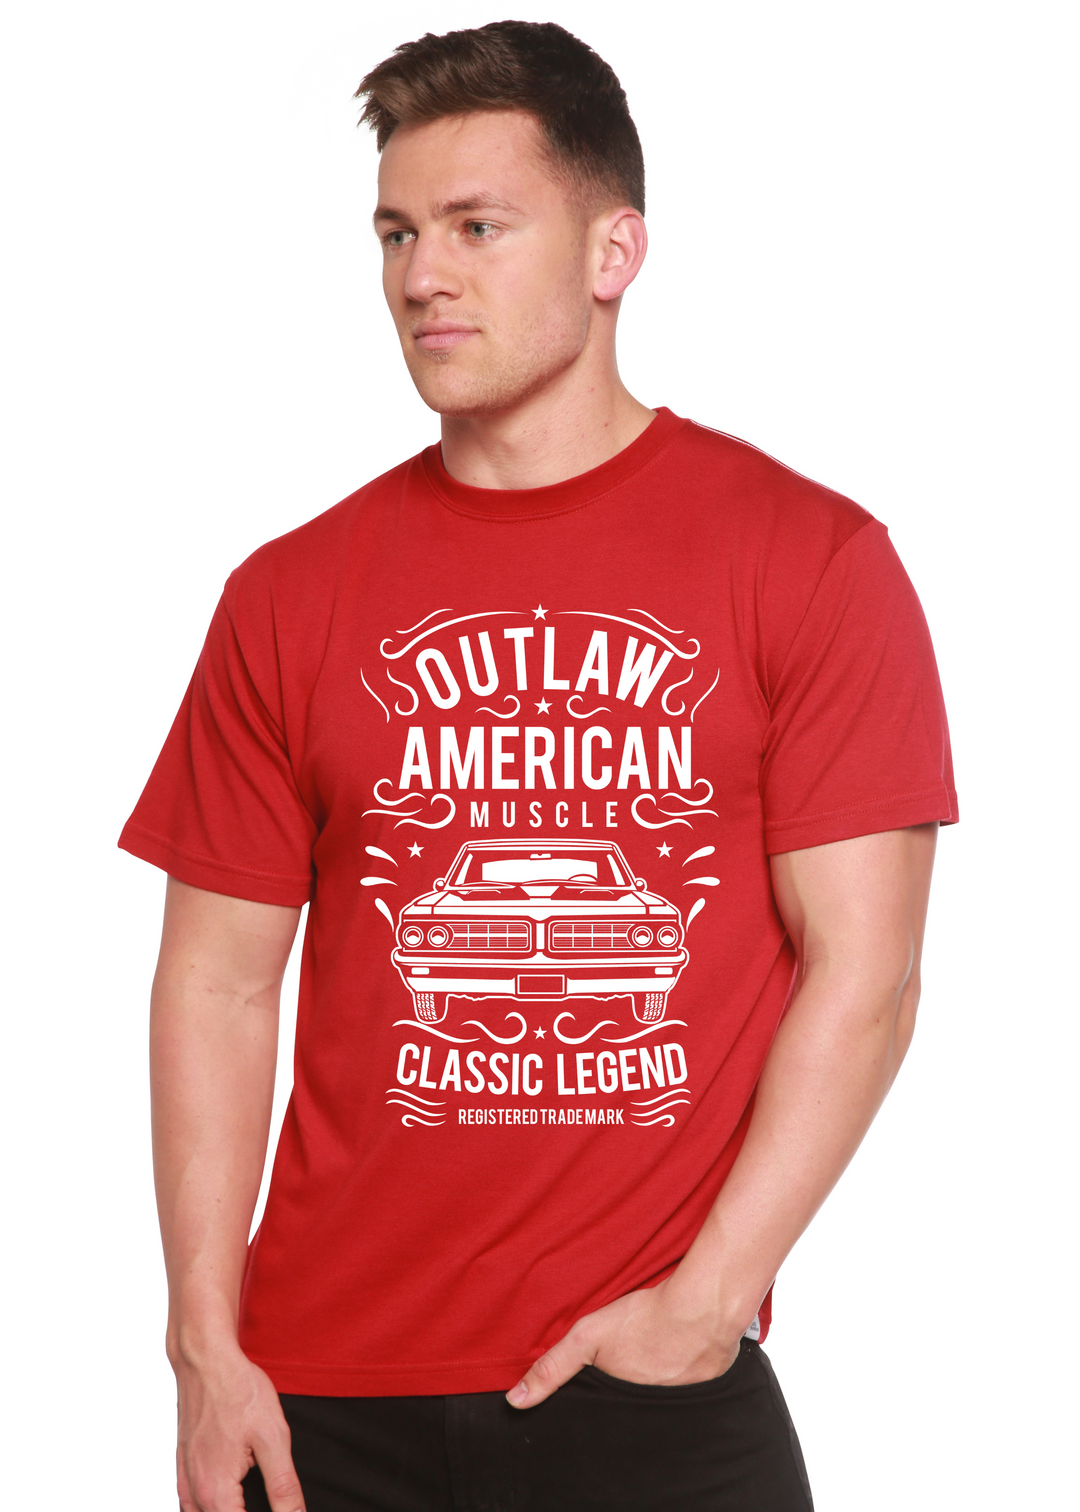  Outlaw American Muscle men's bamboo tshirt pompeian red